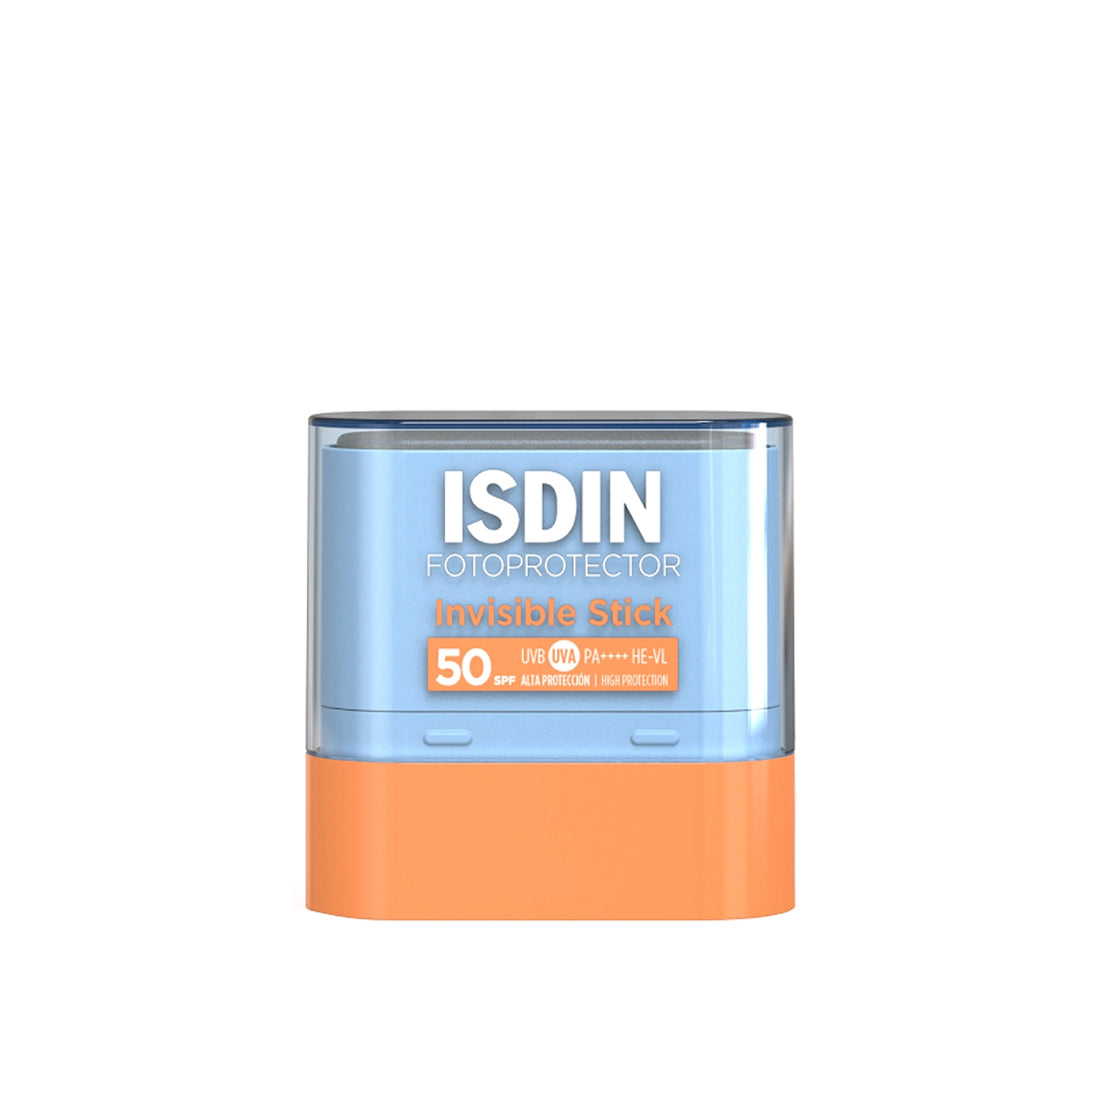 ISDIN Fotoprotector Invisible Stick FPS50 10g